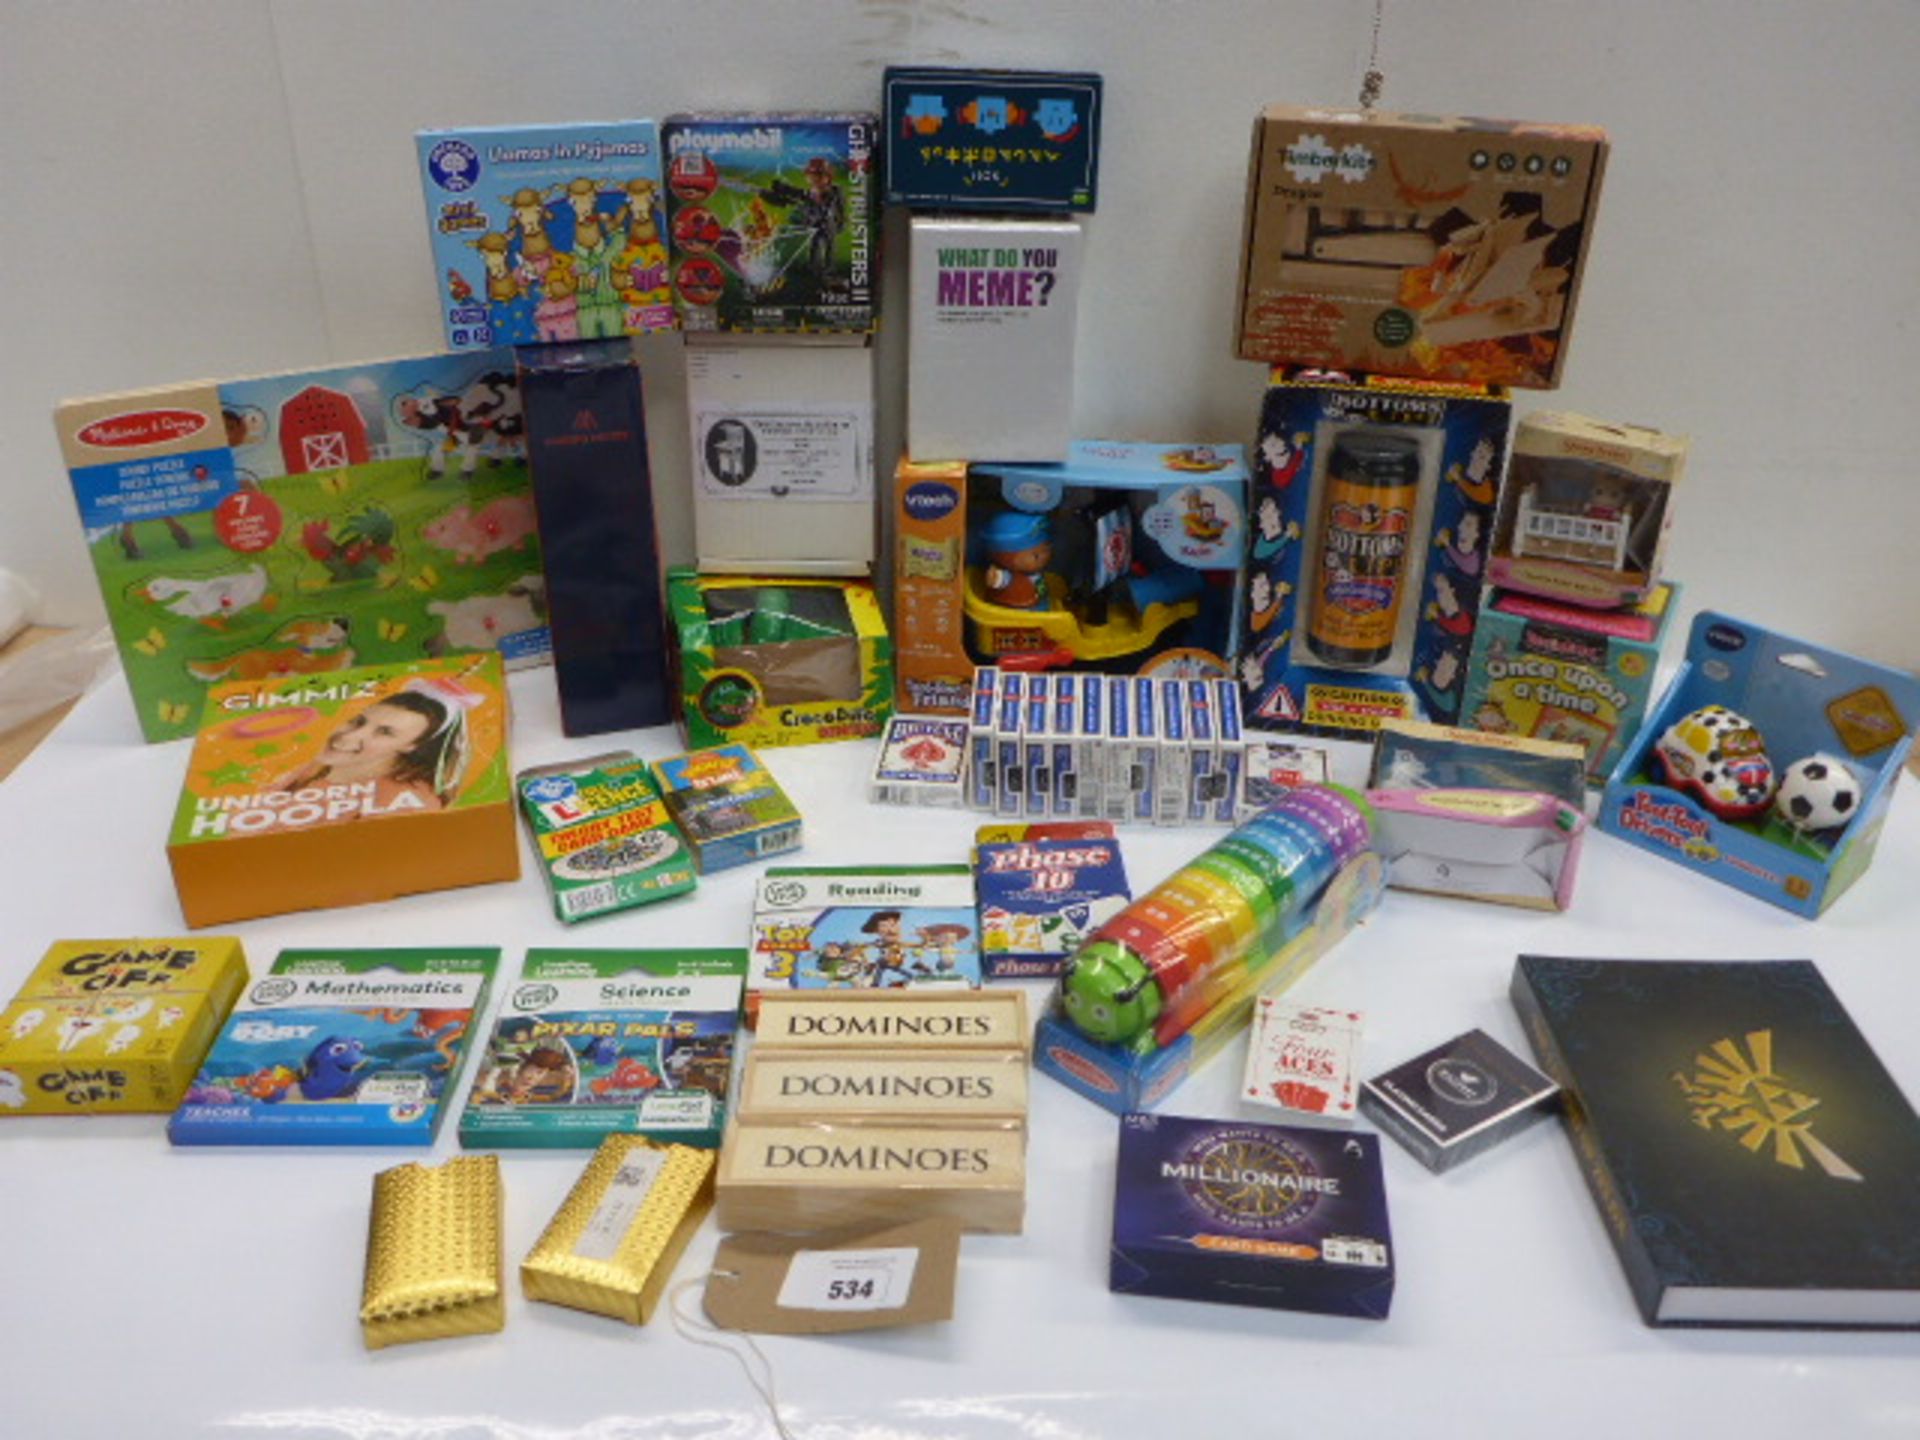 30+ toys, games, packs of cards including What Do You Meme?, Making Moves, Vtech Pirate Ship,